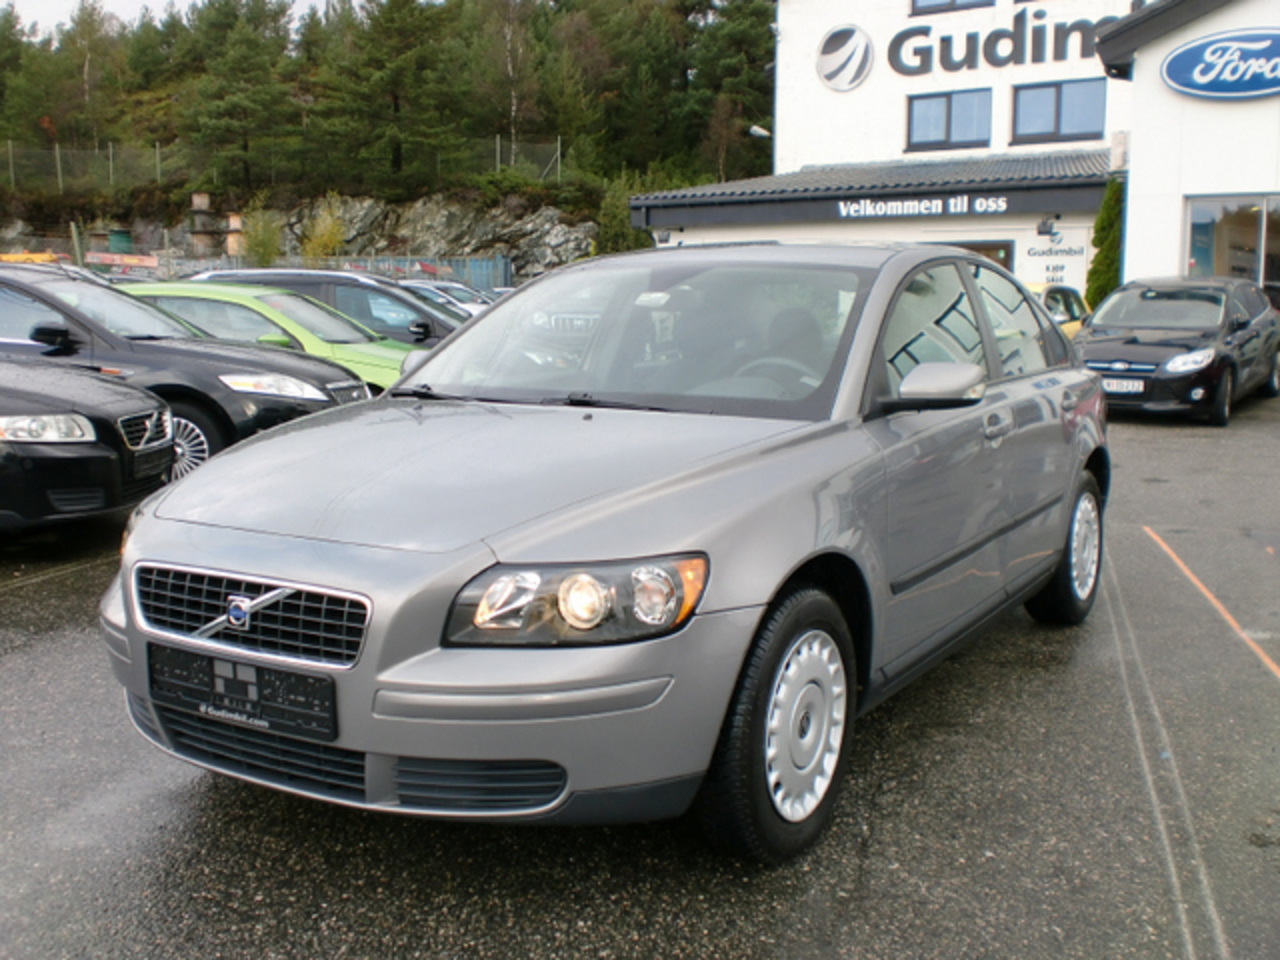 Volvo V70 23T. View Download Wallpaper. 640x480. Comments